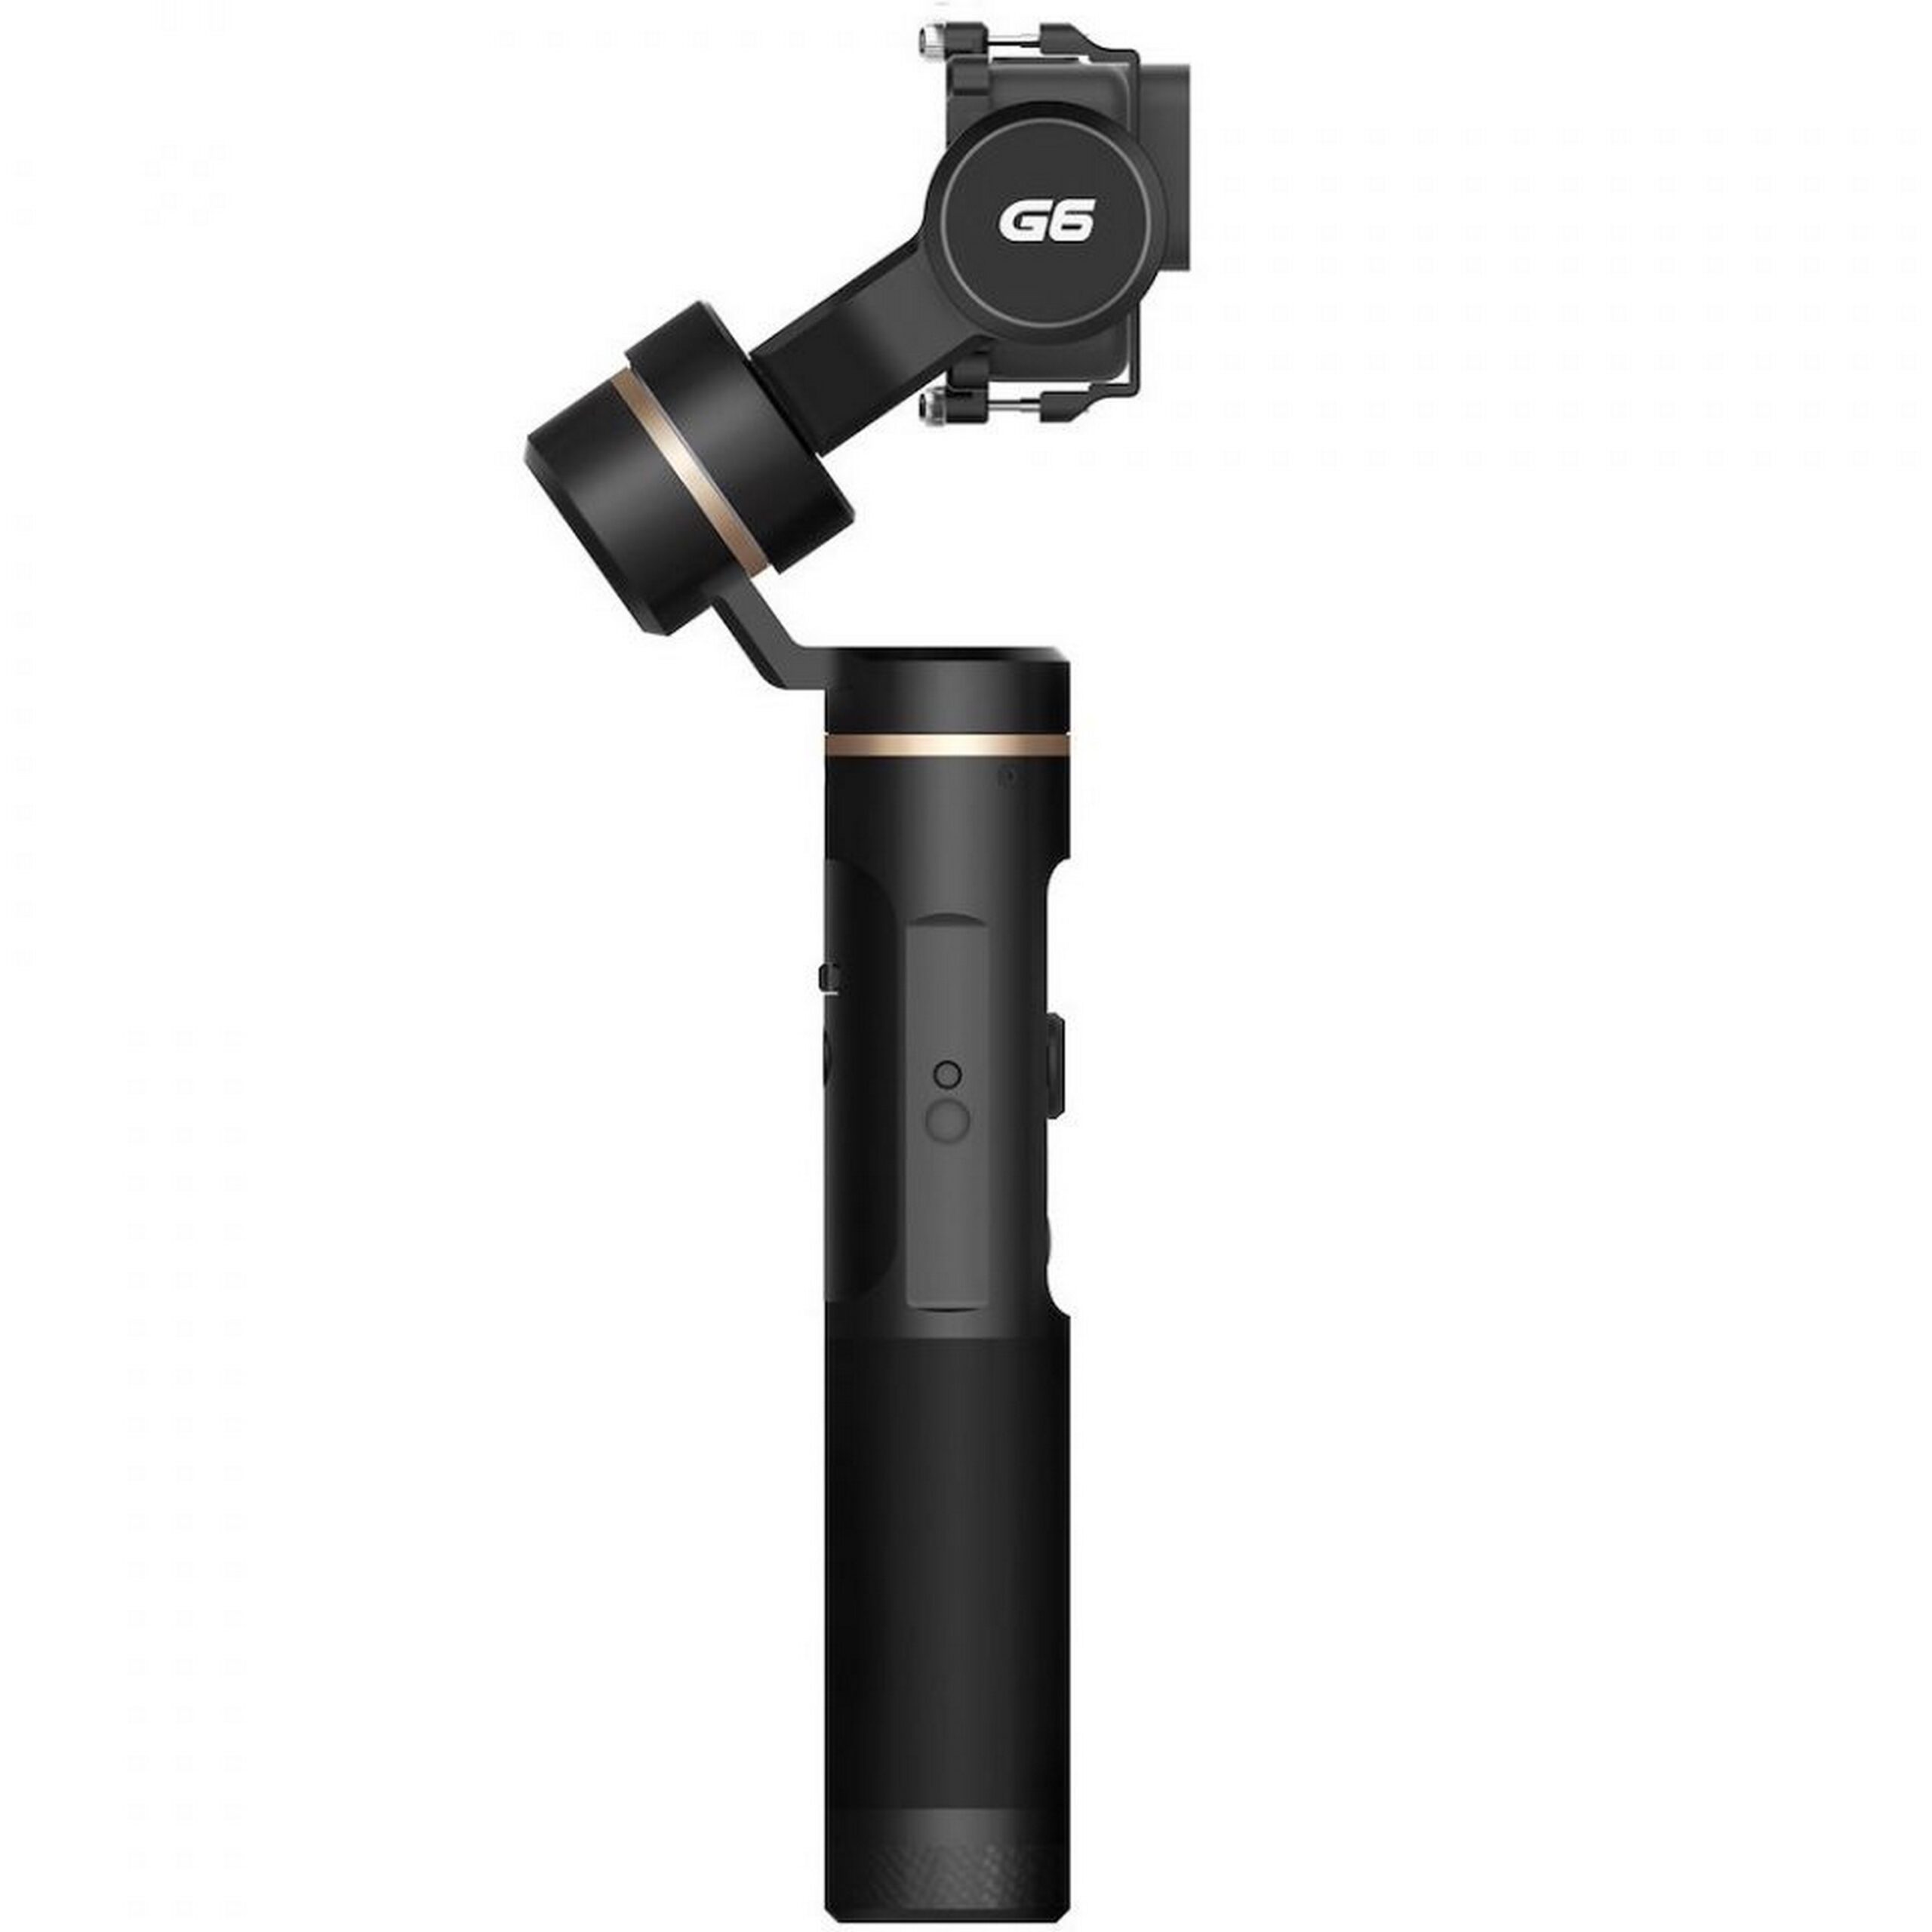 FeiyuTech G6 3-Axis Handheld Gimbal for Action Cameras – AVLGEAR